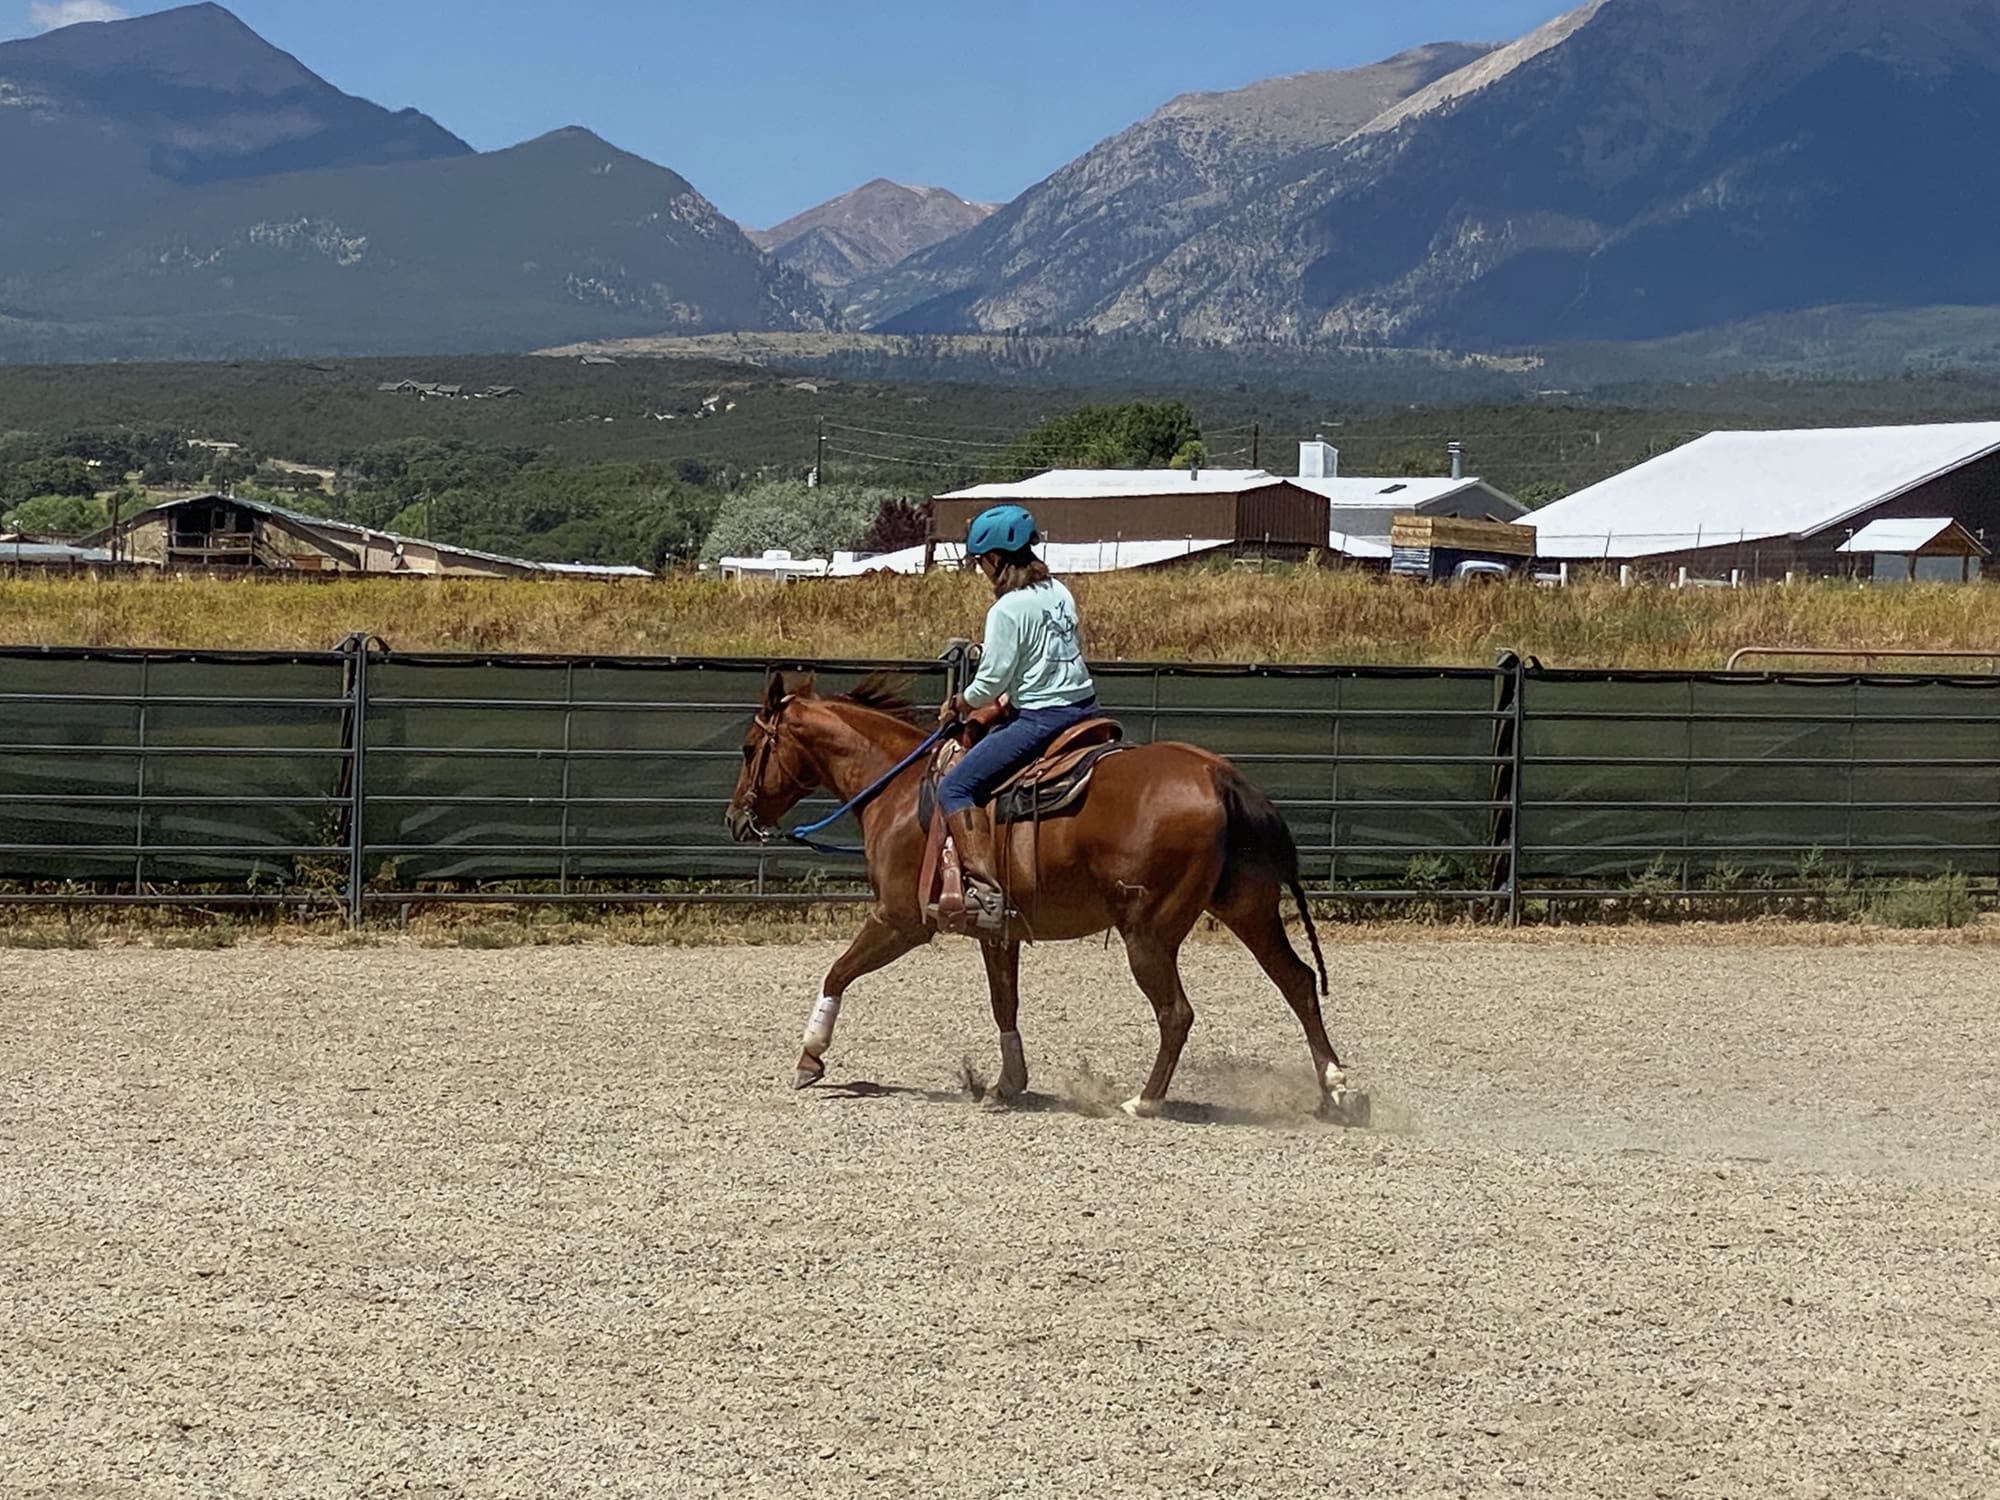 Annie and Juliie cantering in the outdoor arena with mountains in the background.